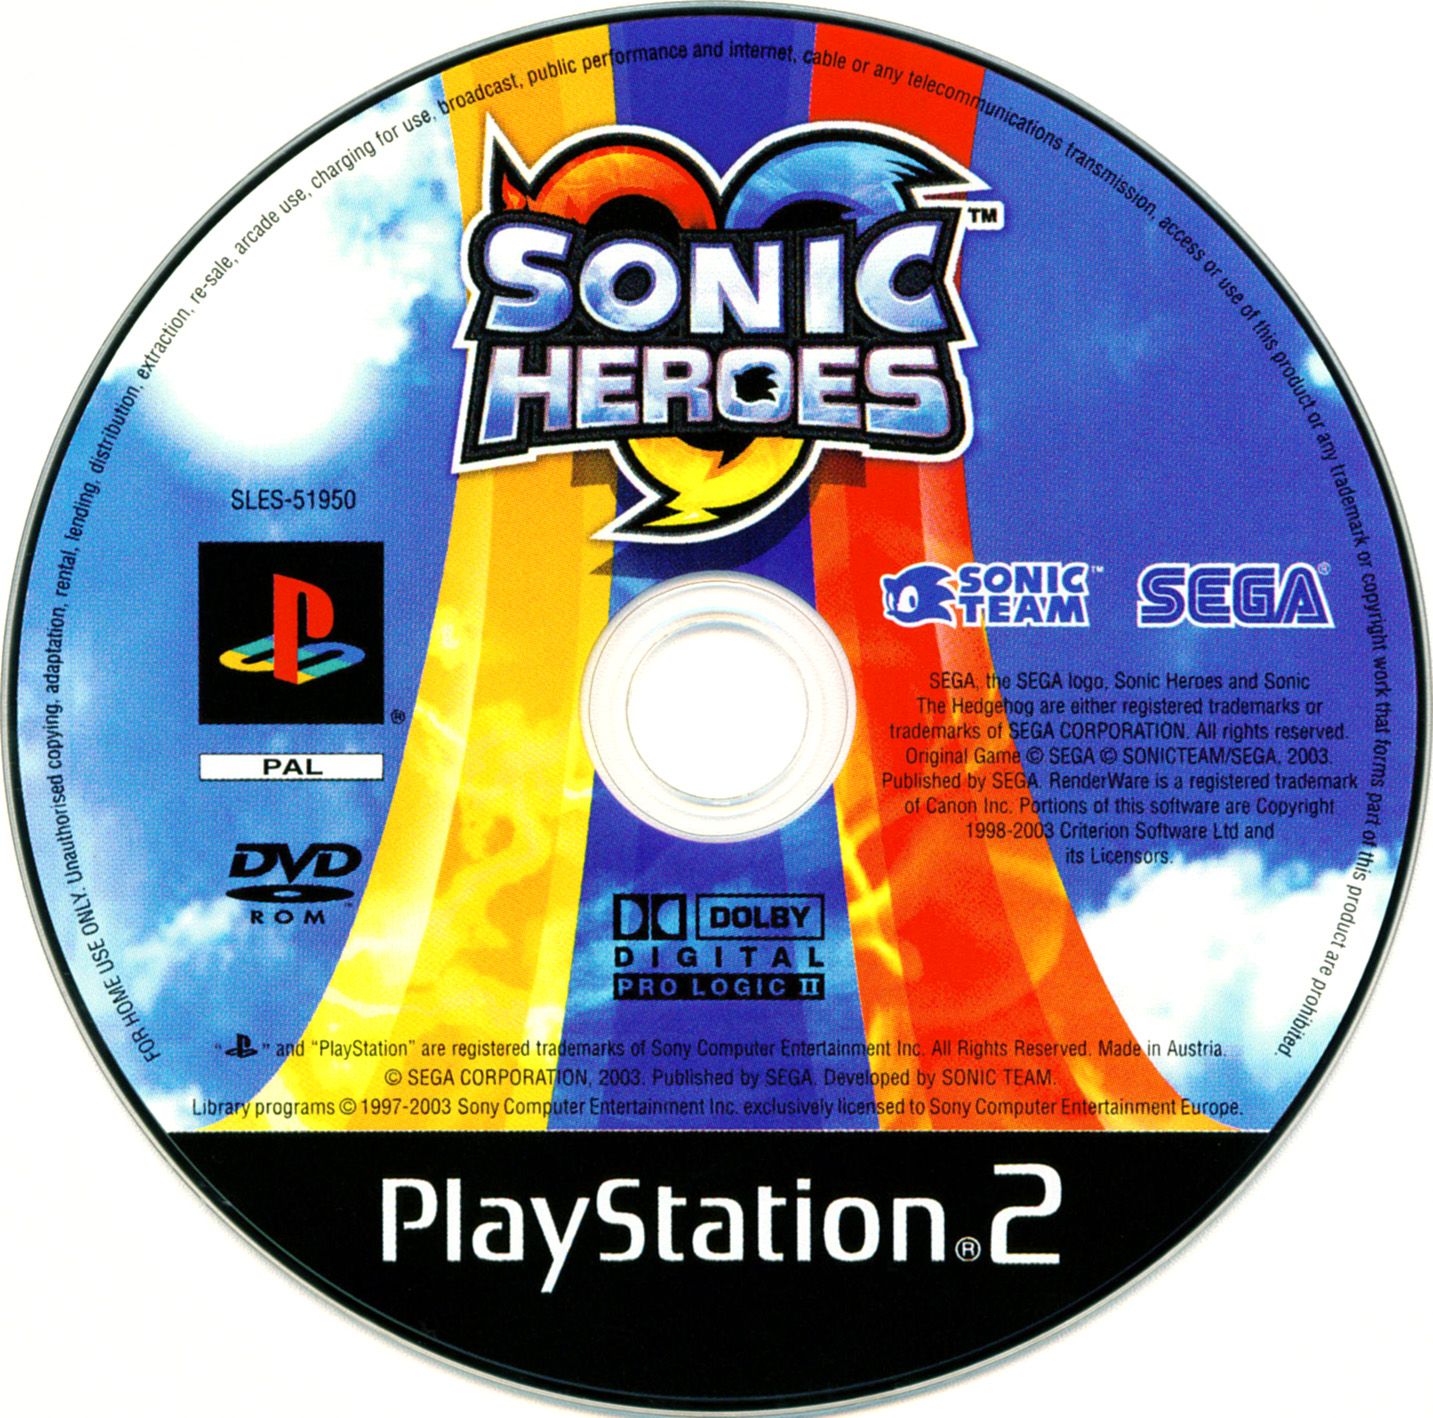 Sony playstation 2 диски. Sonic Heroes диск ps2. Диски Sonic для PLAYSTATION 2. Sonic Heroes ps2 обложка. Диск на PLAYSTATION 3 Sonic.